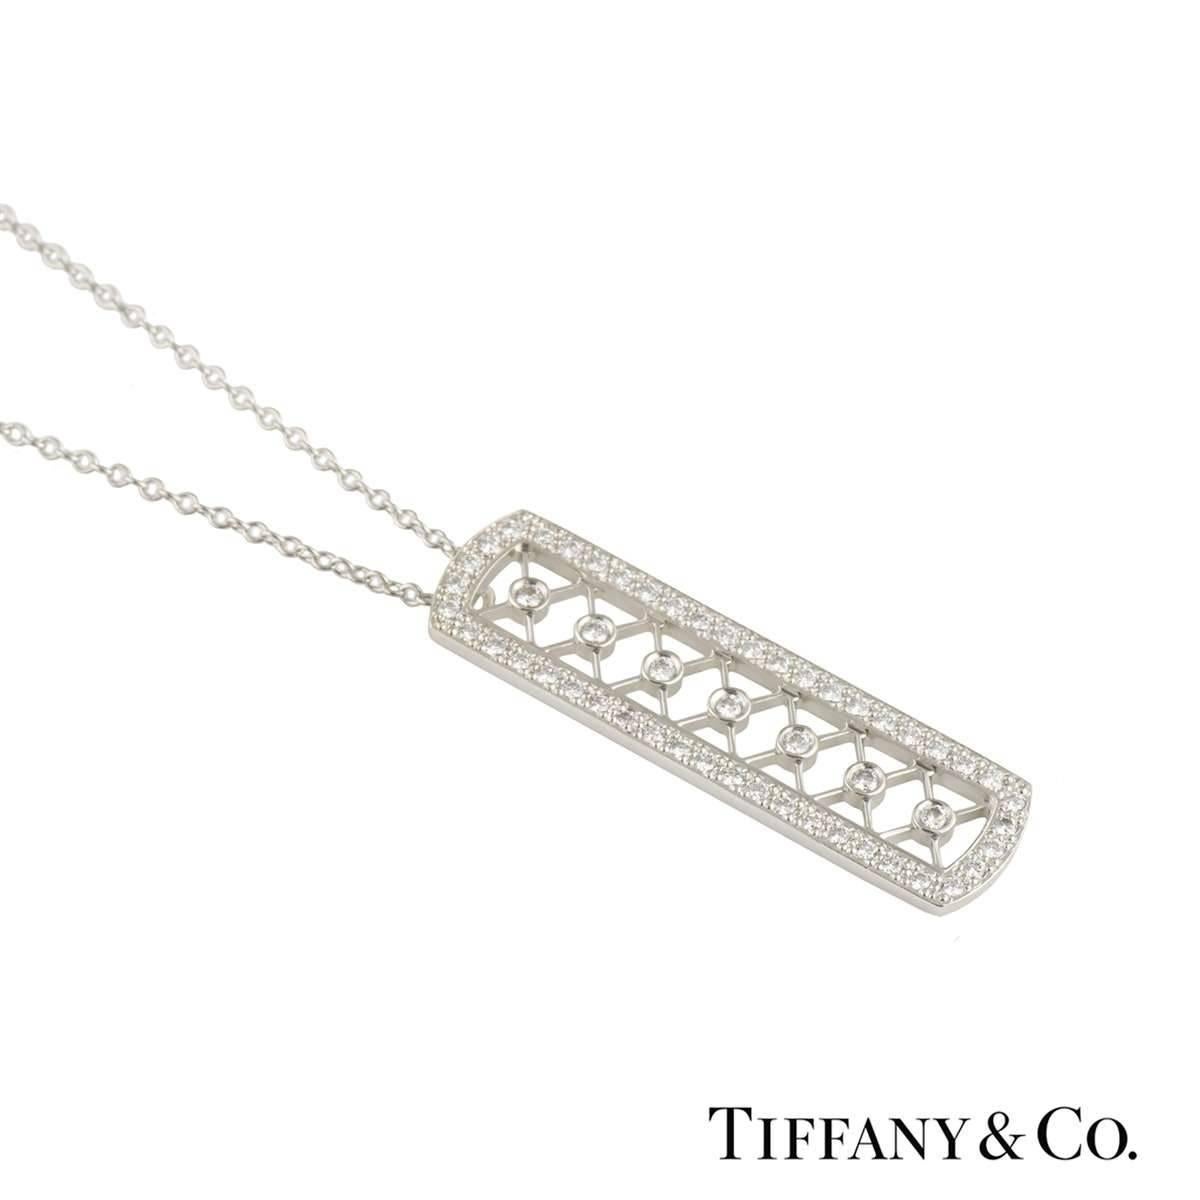 A stunning platinum Tiffany & Co. diamond pendant. The pendant comprises of a rectangular open work motif with 46 round brilliant cut diamonds around the outer edge in a pave setting. Complimenting the outer edge is a criss cross open work